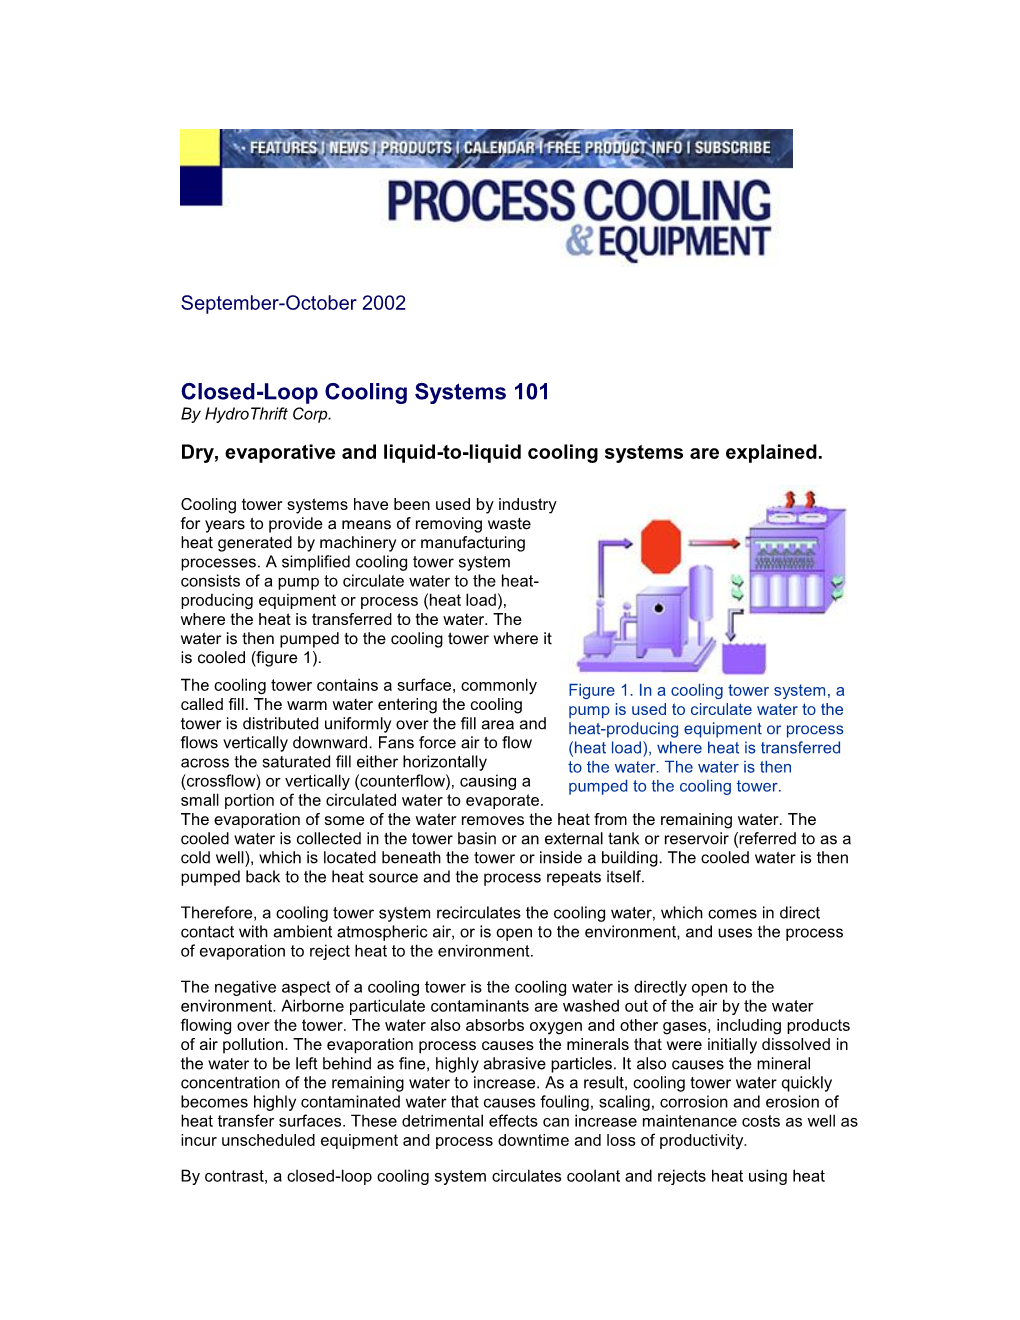 Cooling Systems 101 by Hydrothrift Corp